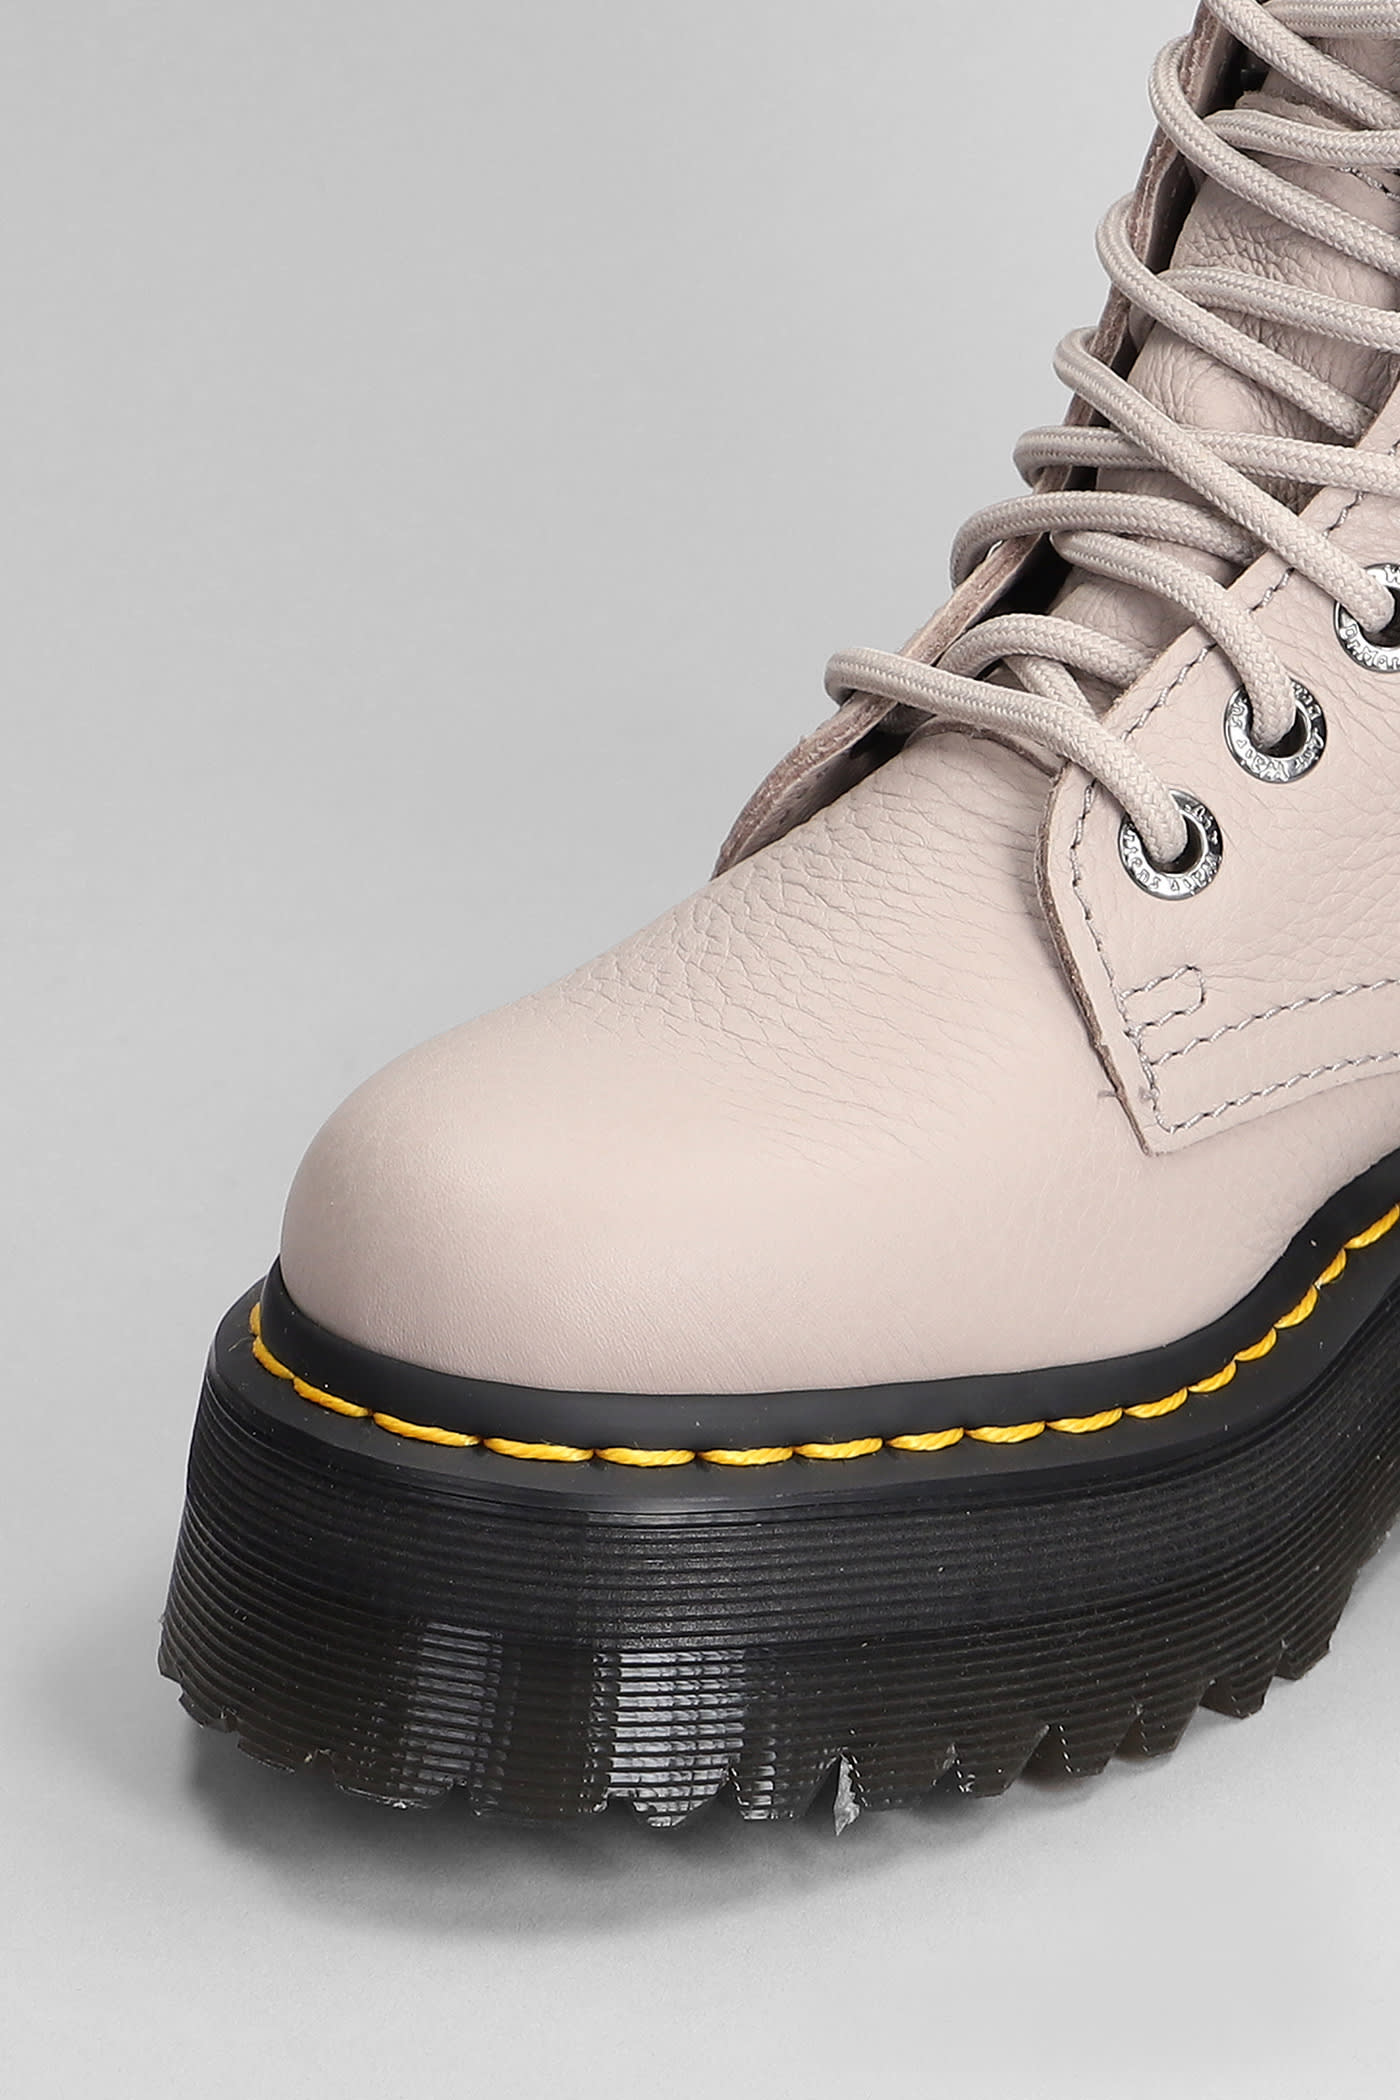 Shop Dr. Martens' Jadon Iii Combat Boots In Taupe Leather